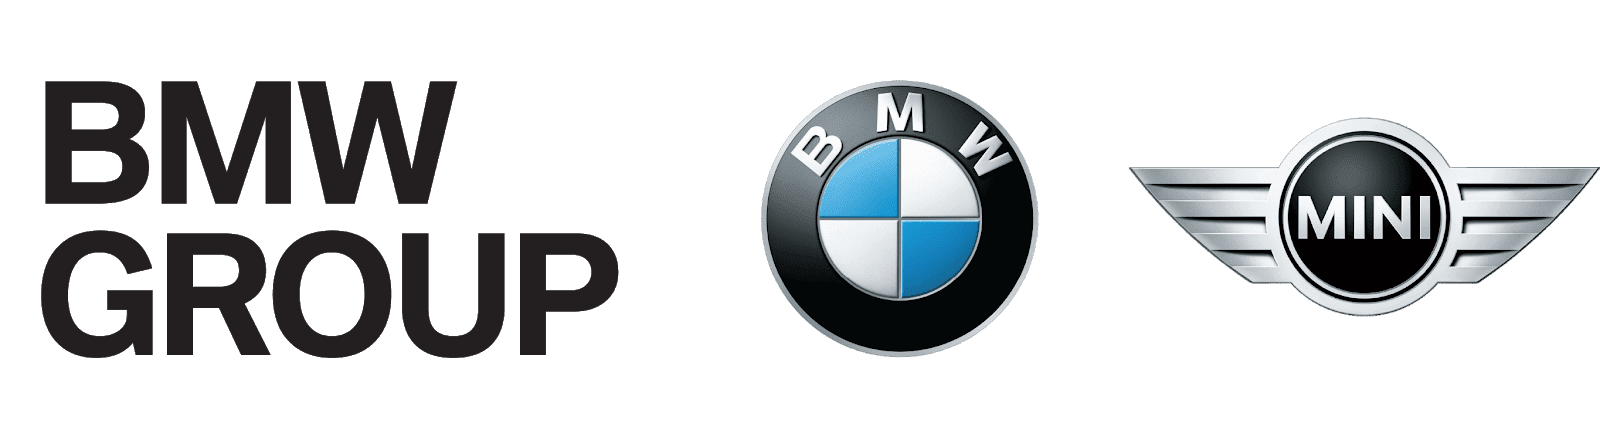 Evolution Of Bmw Group Its Routes And